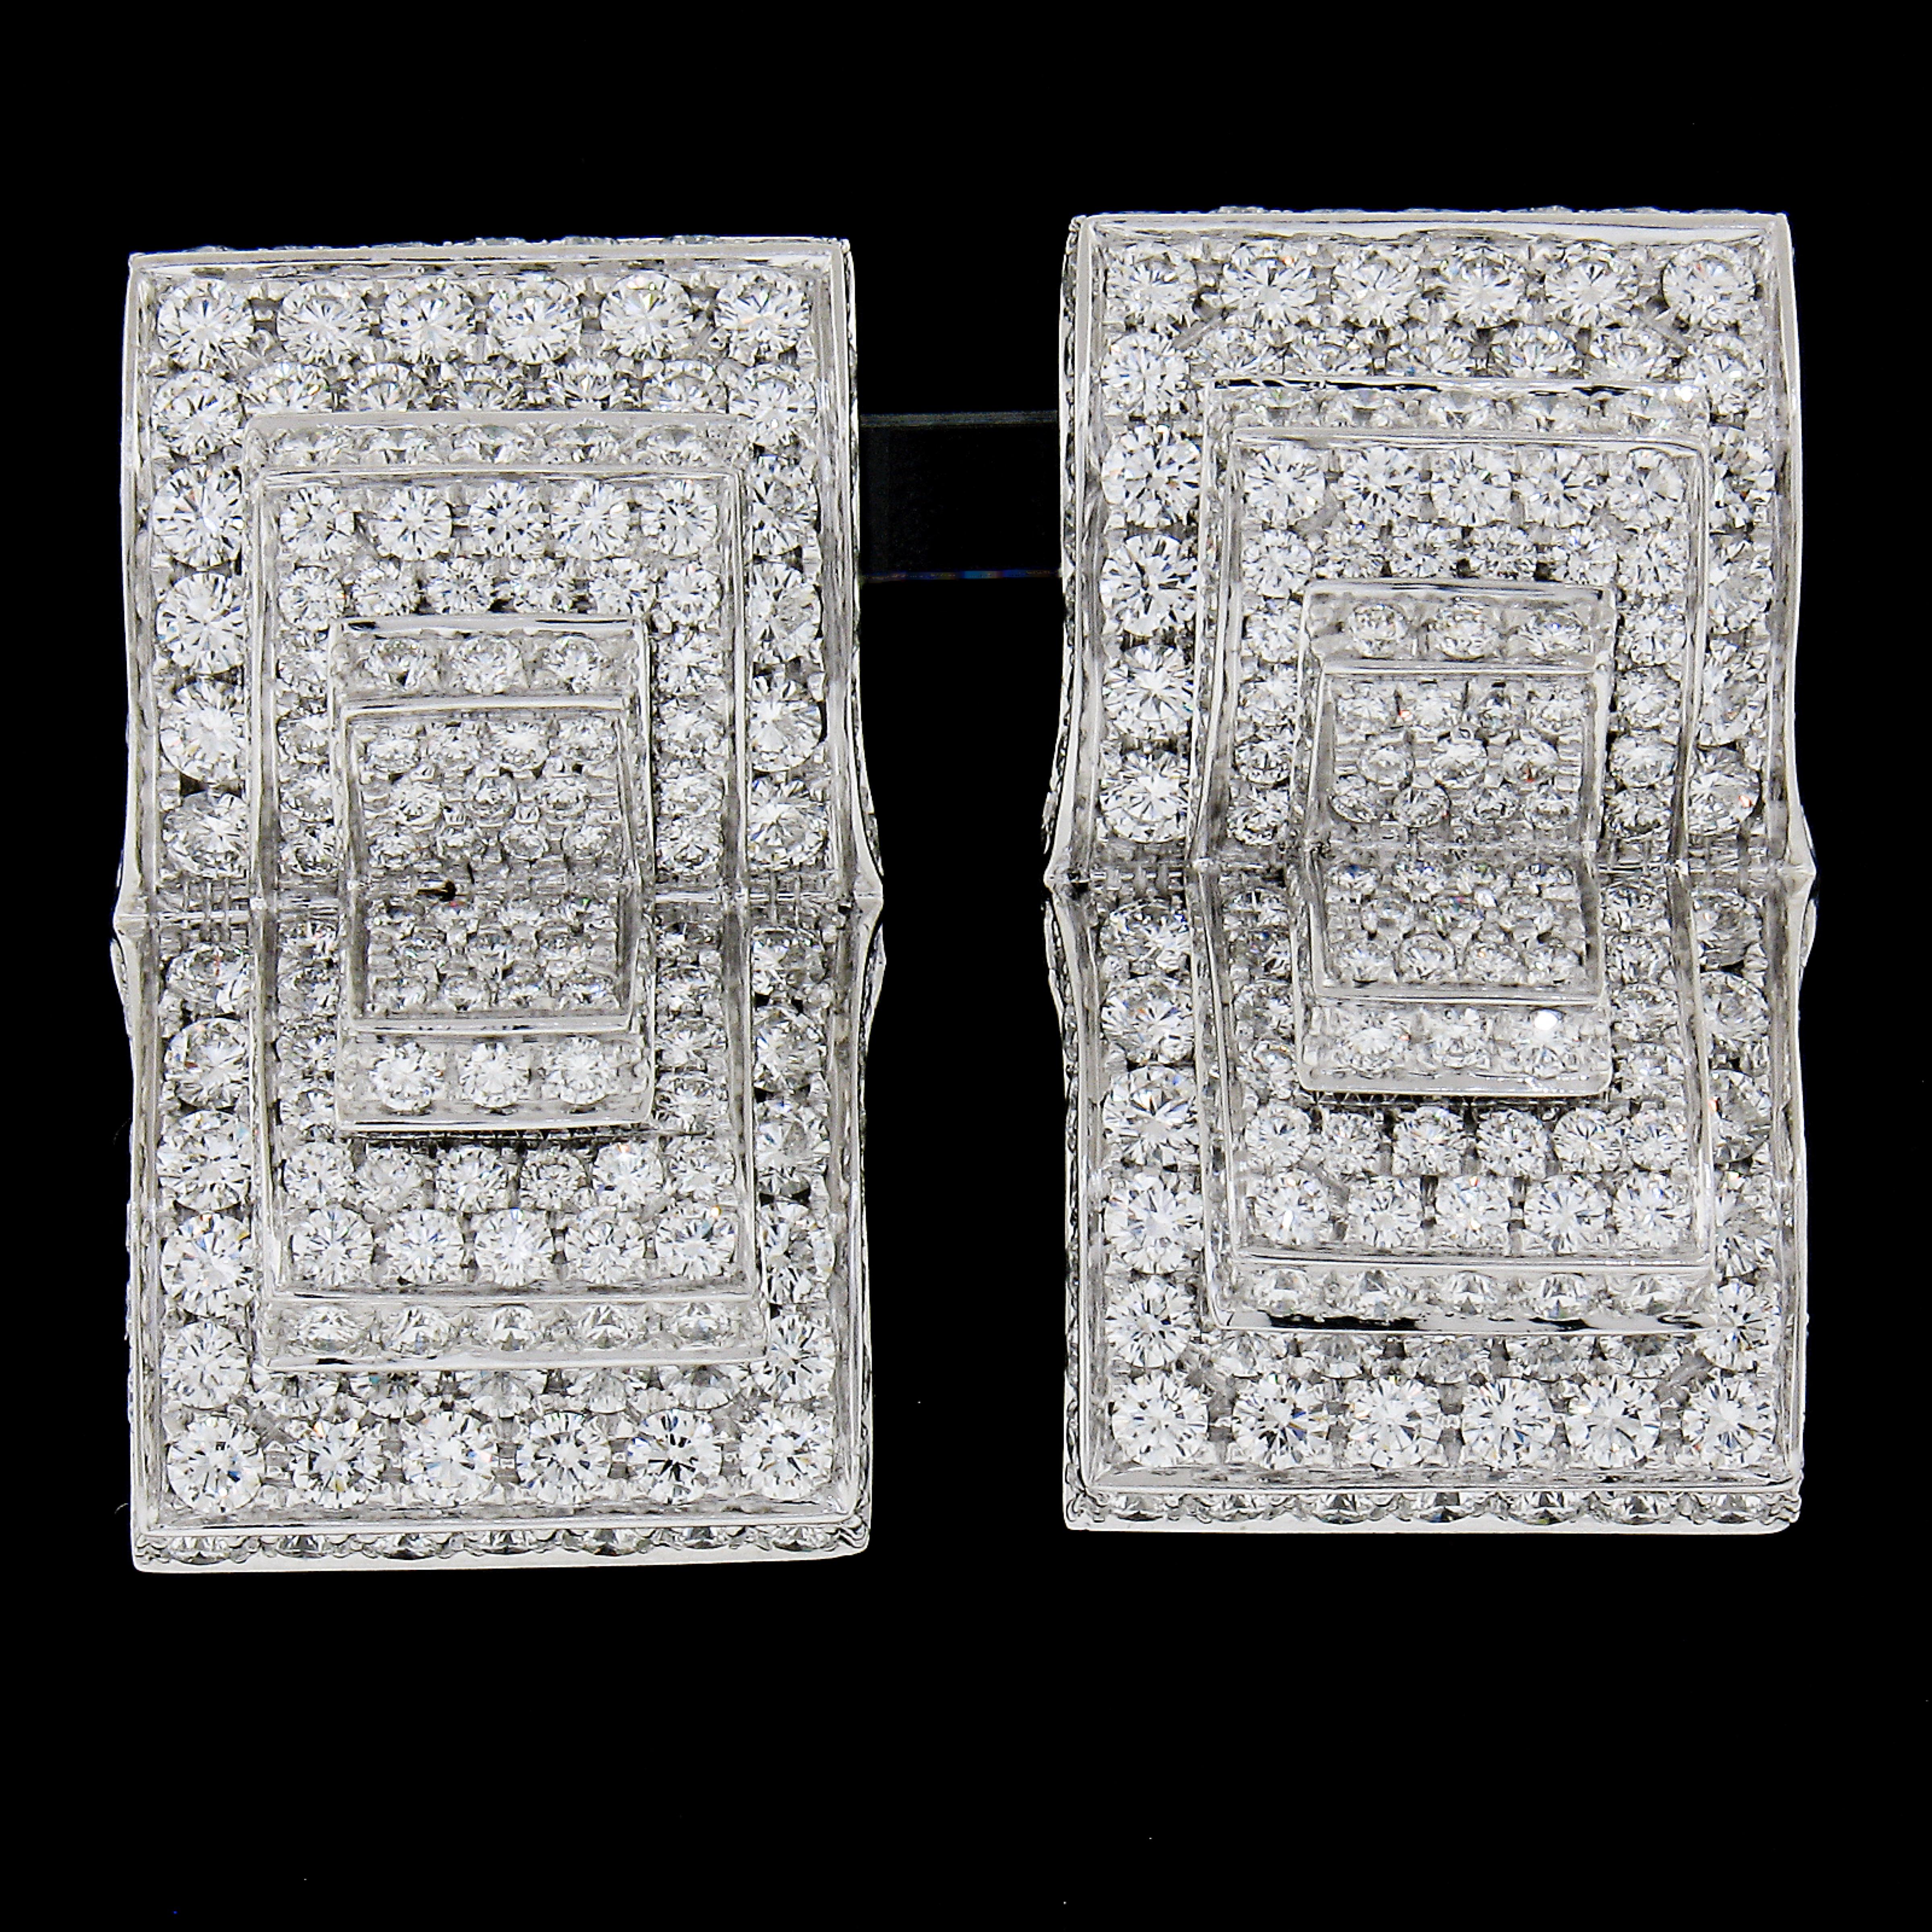 --Stones:--
392 Natural Genuine Diamonds - Round Brilliant Cut - Pave Set - G/H Color - VVS2-VS2 Clarity - 7 - 8ctw approx.

Material: 18K Solid White Gold 
Weight: 33.32 Grams
Backing:	Swivel Posts Can Be Worn as Omega Closures or Clip On Closures